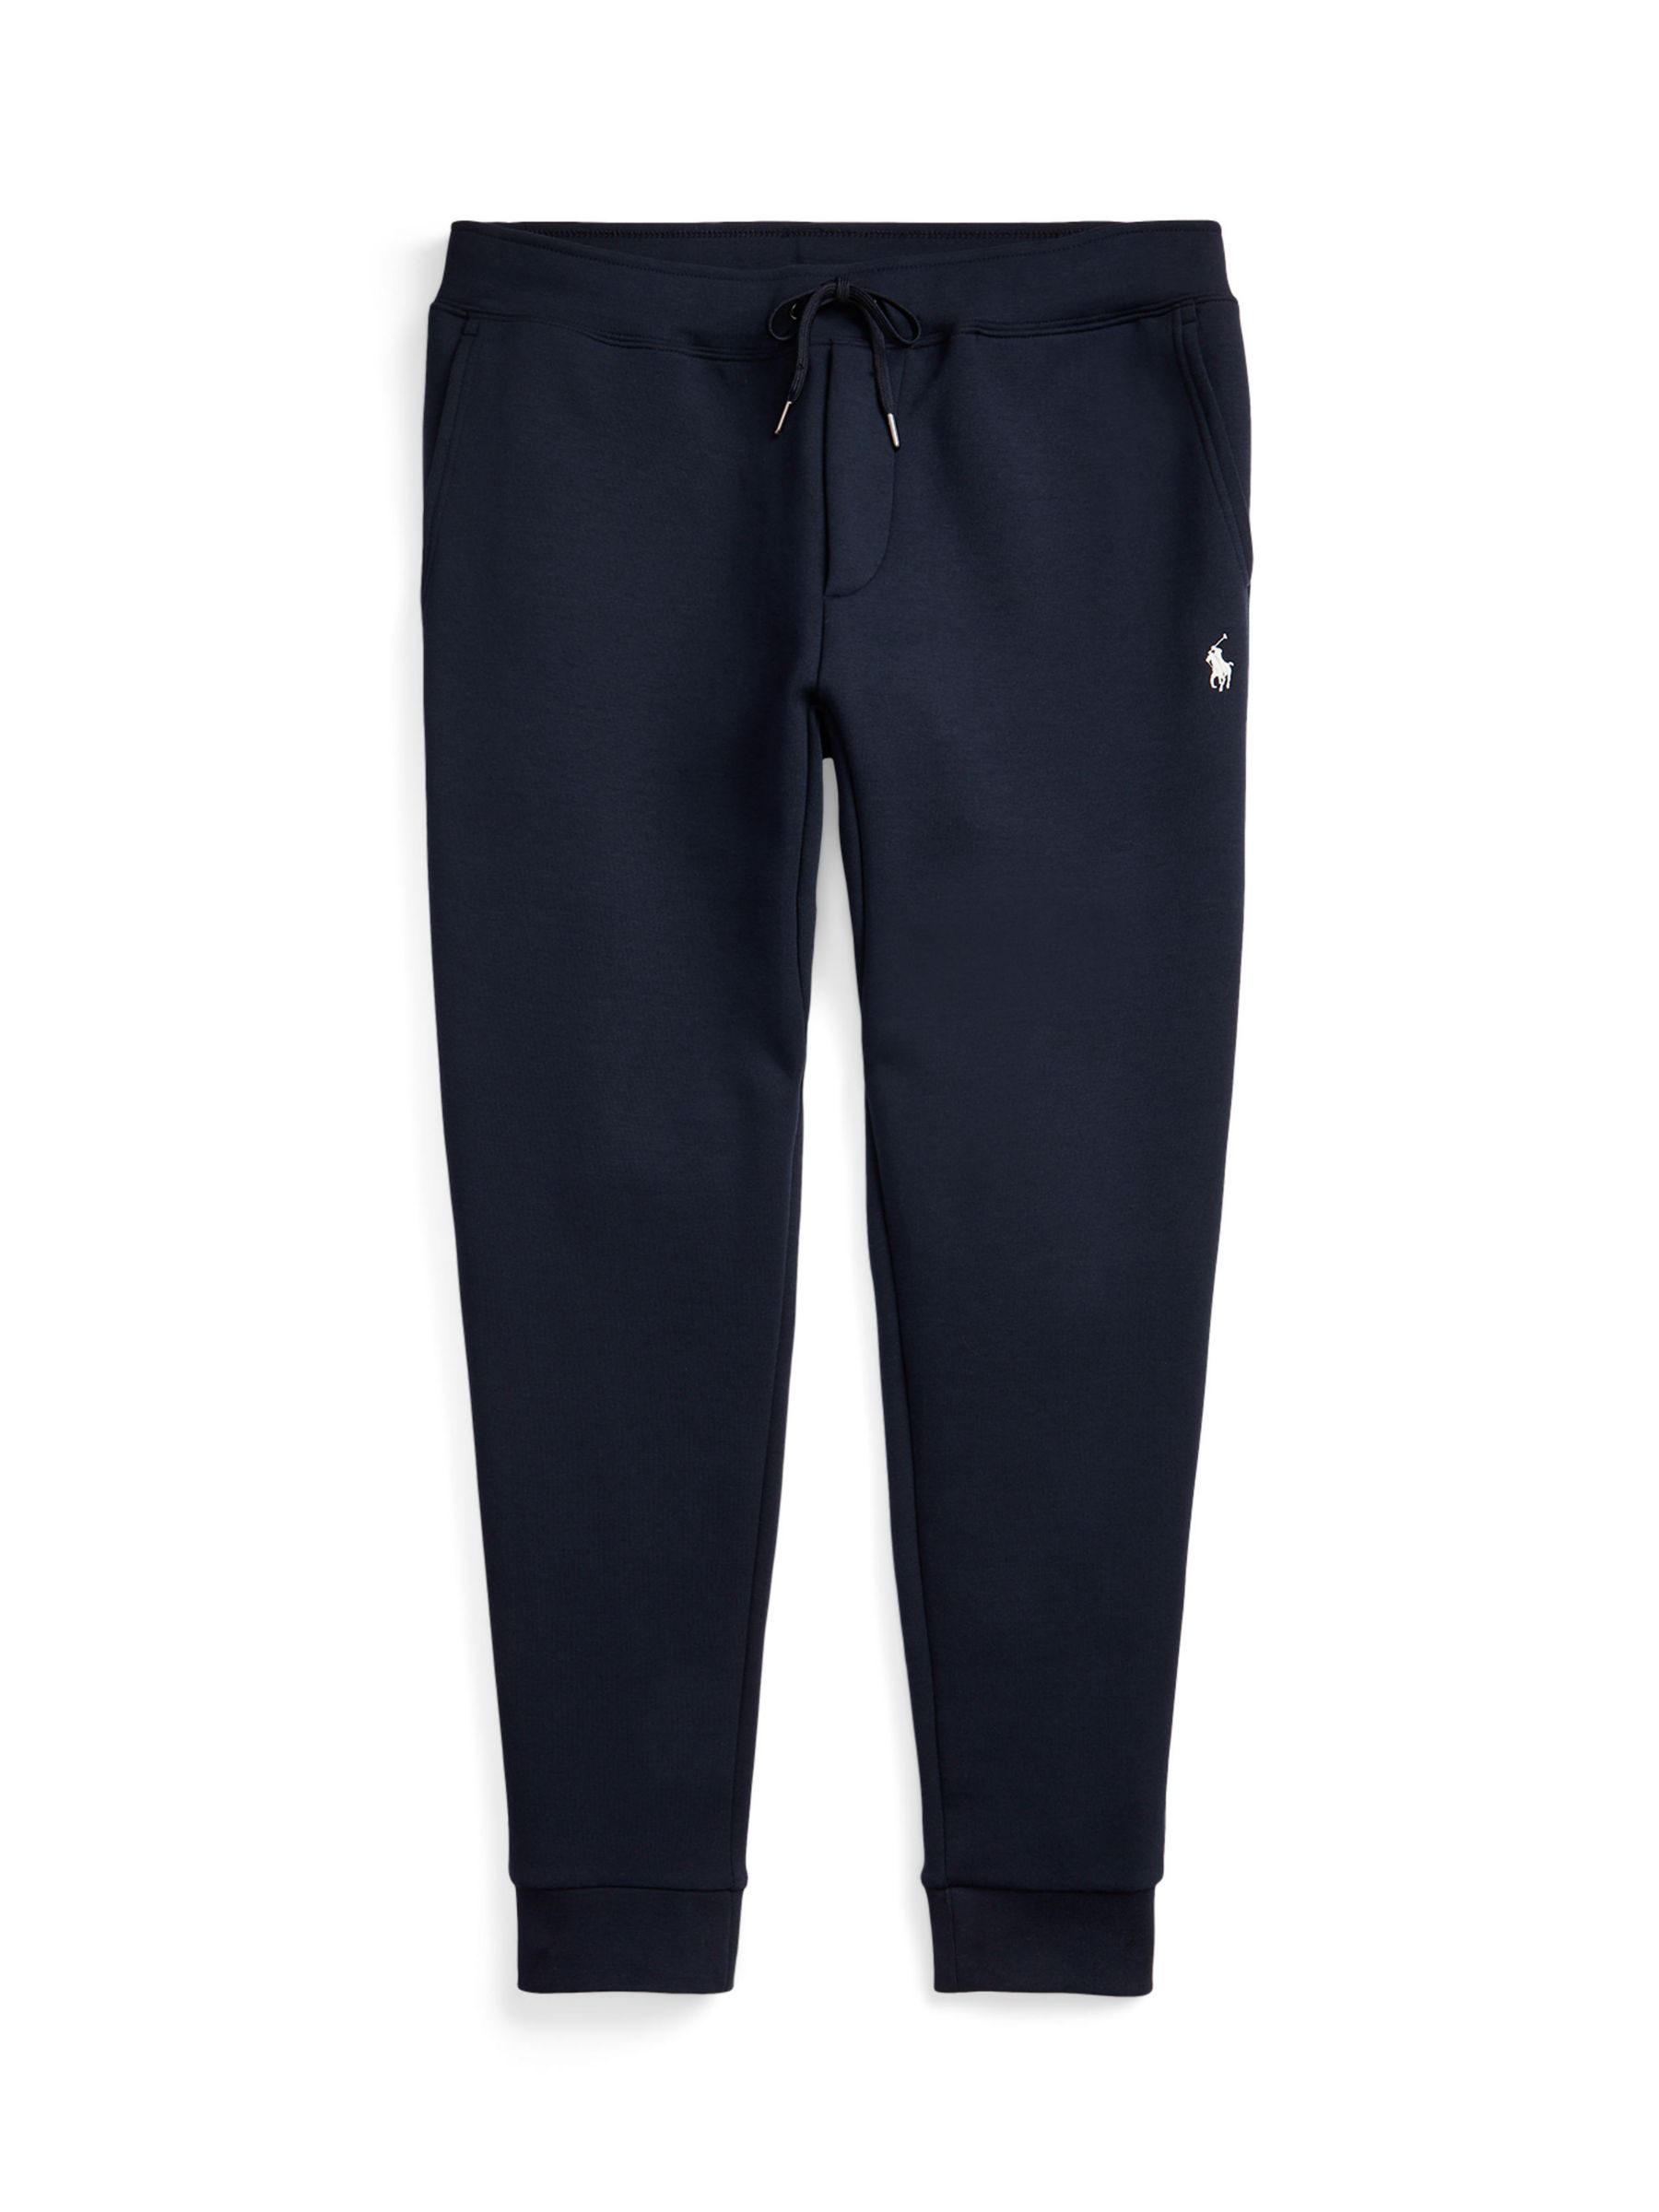 Buy Polo Ralph Lauren Double Knit Trousers Online at johnlewis.com